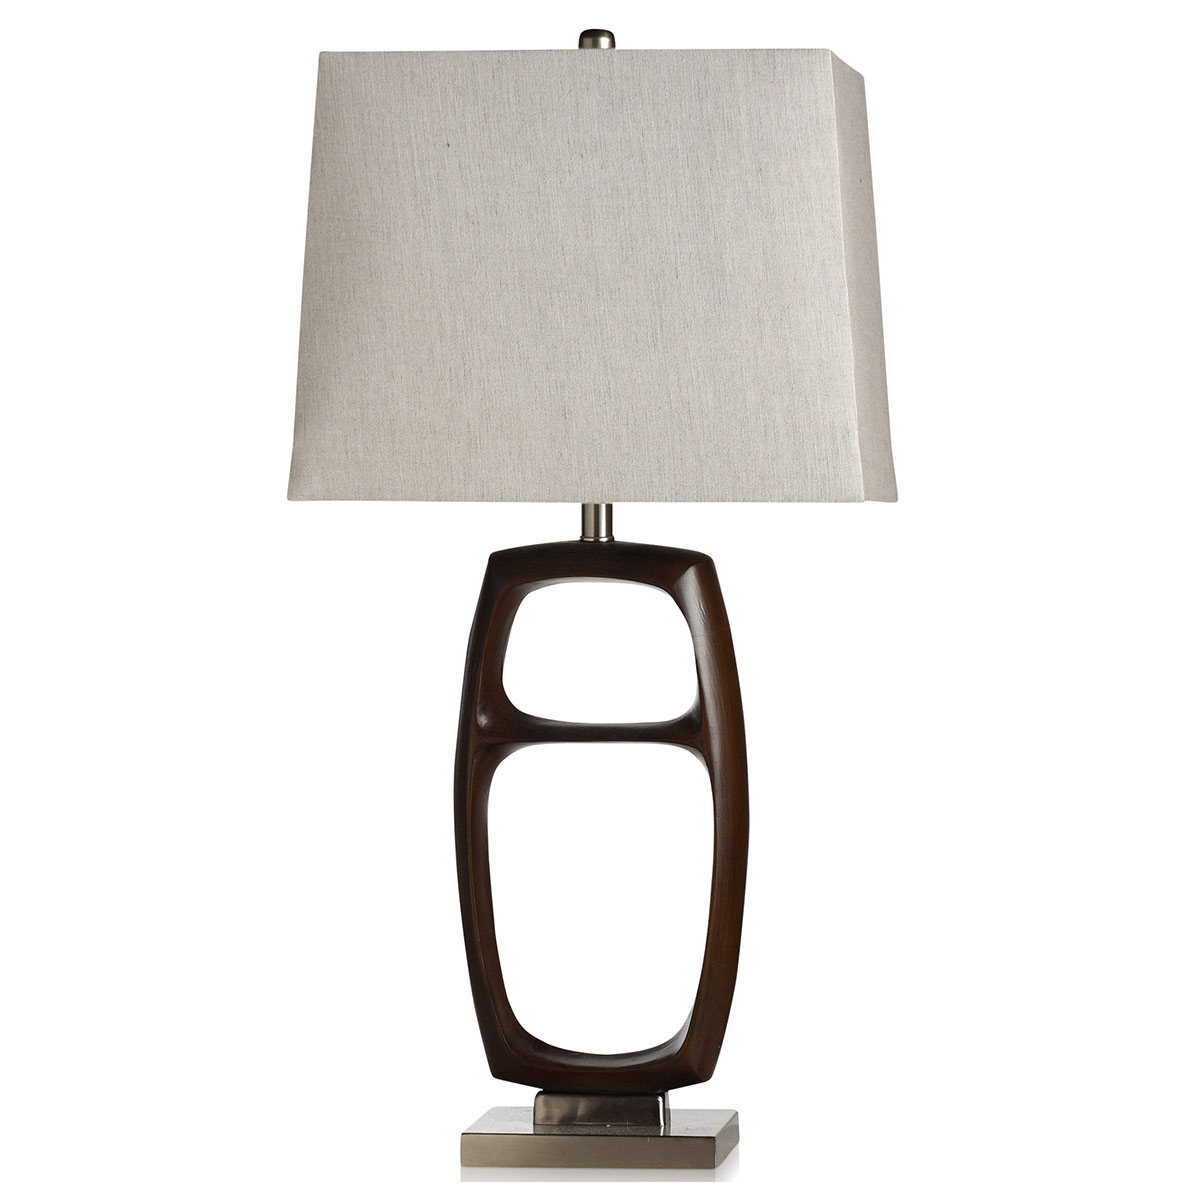 Style Craft Woodbridge Table Lamp w/ USB and Outlet